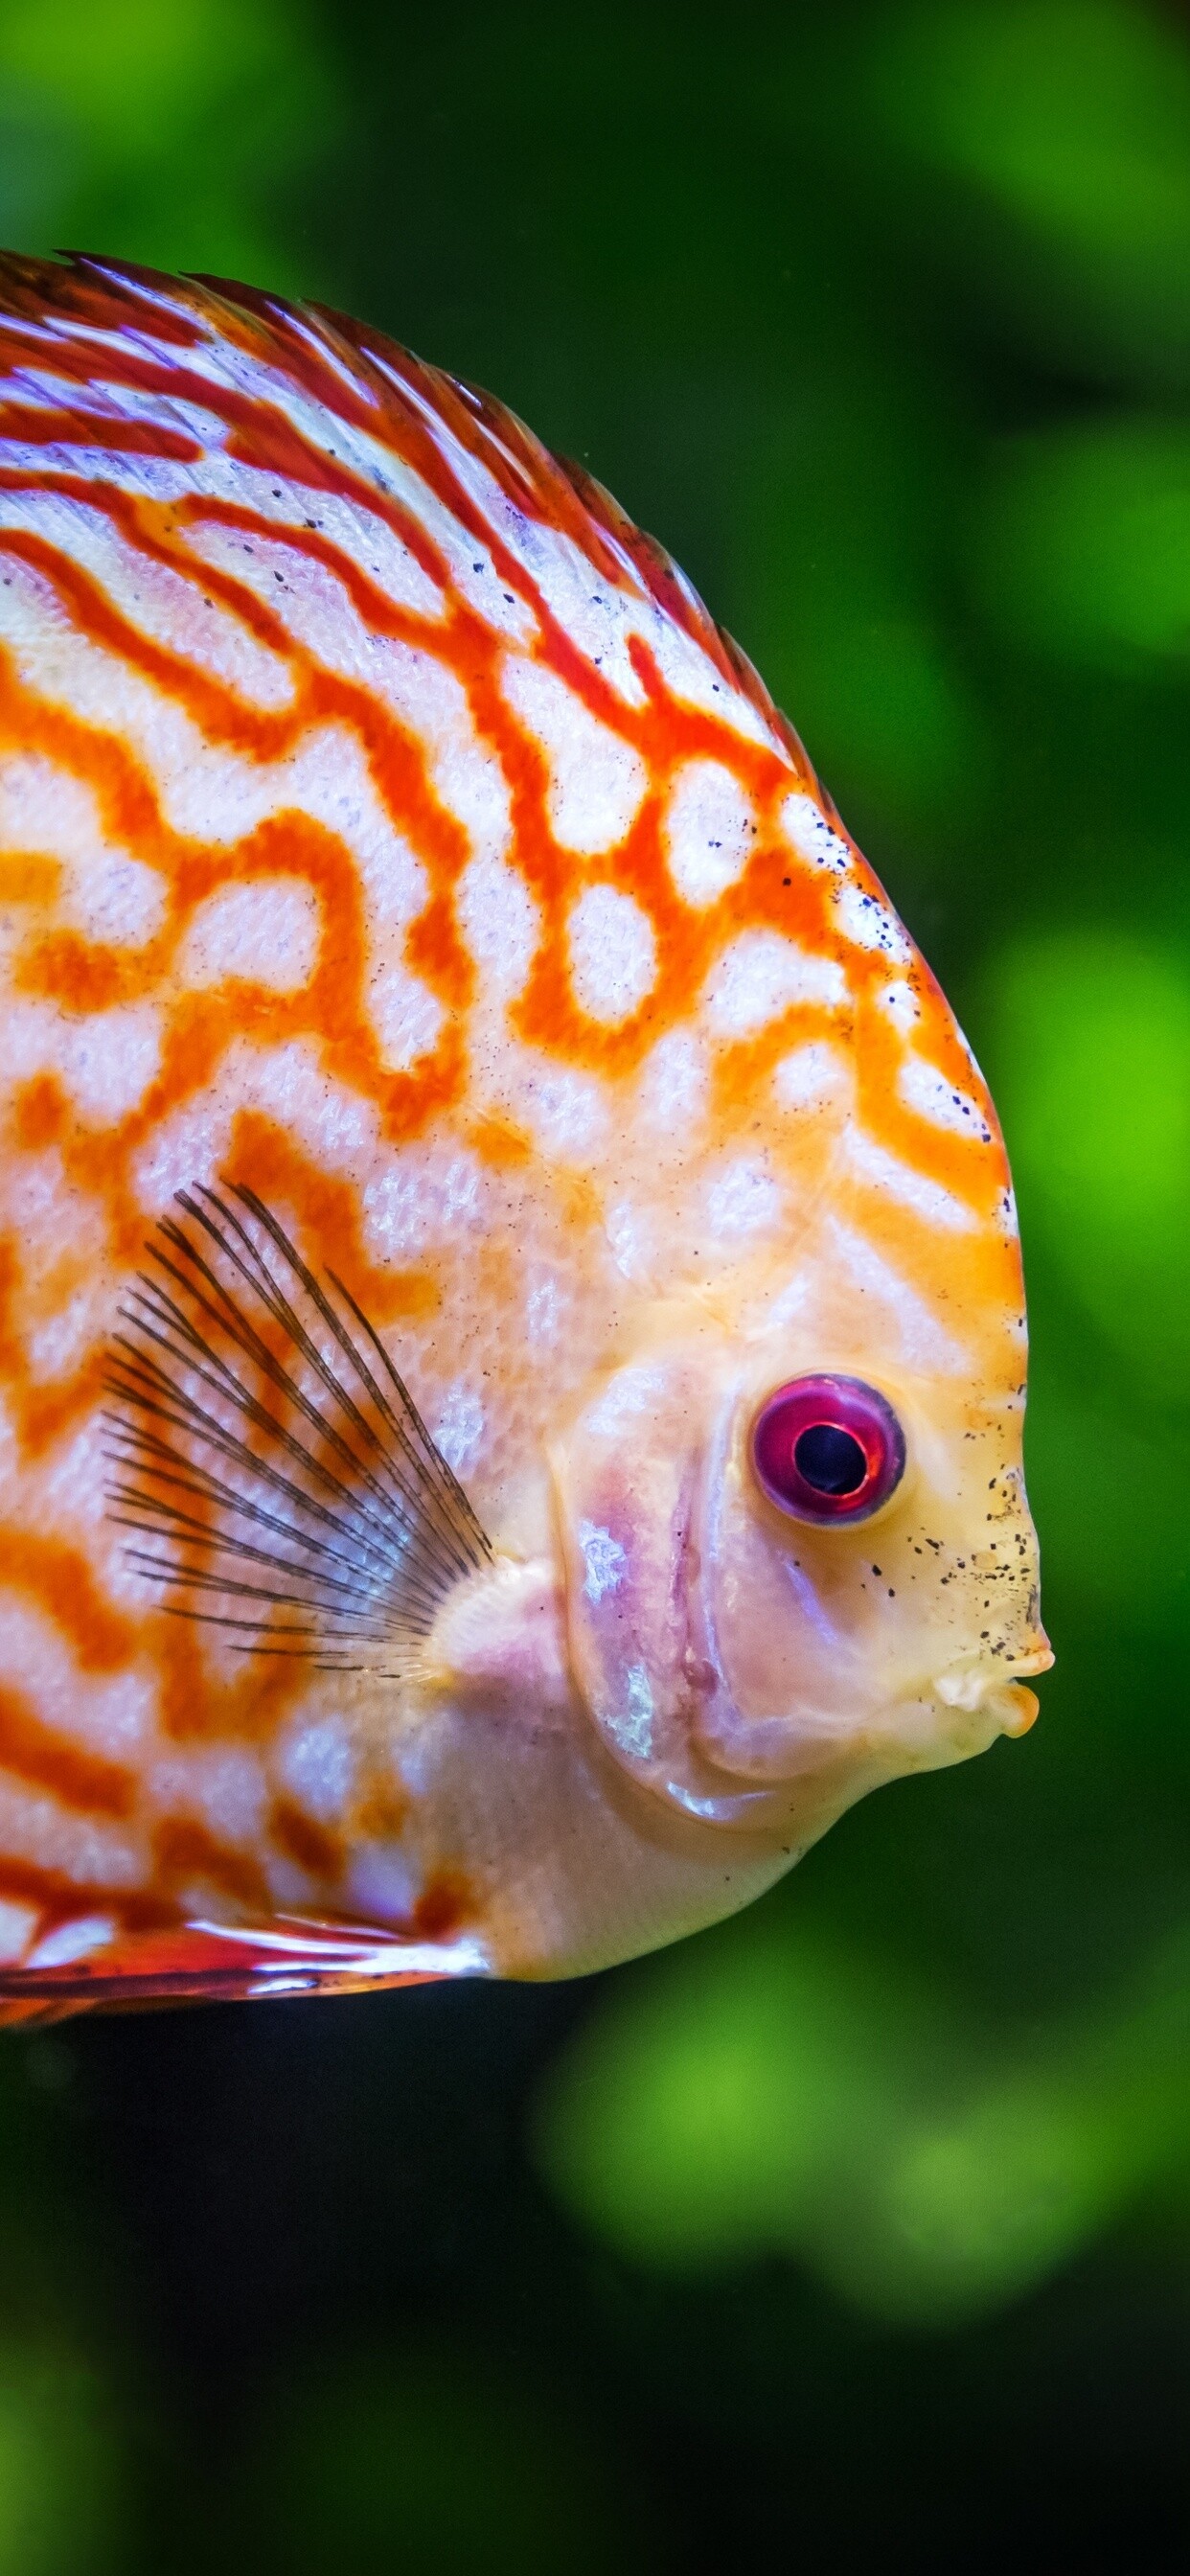 Fish: Discus, A species of cichlid native to the Amazon Basin. 1250x2690 HD Wallpaper.